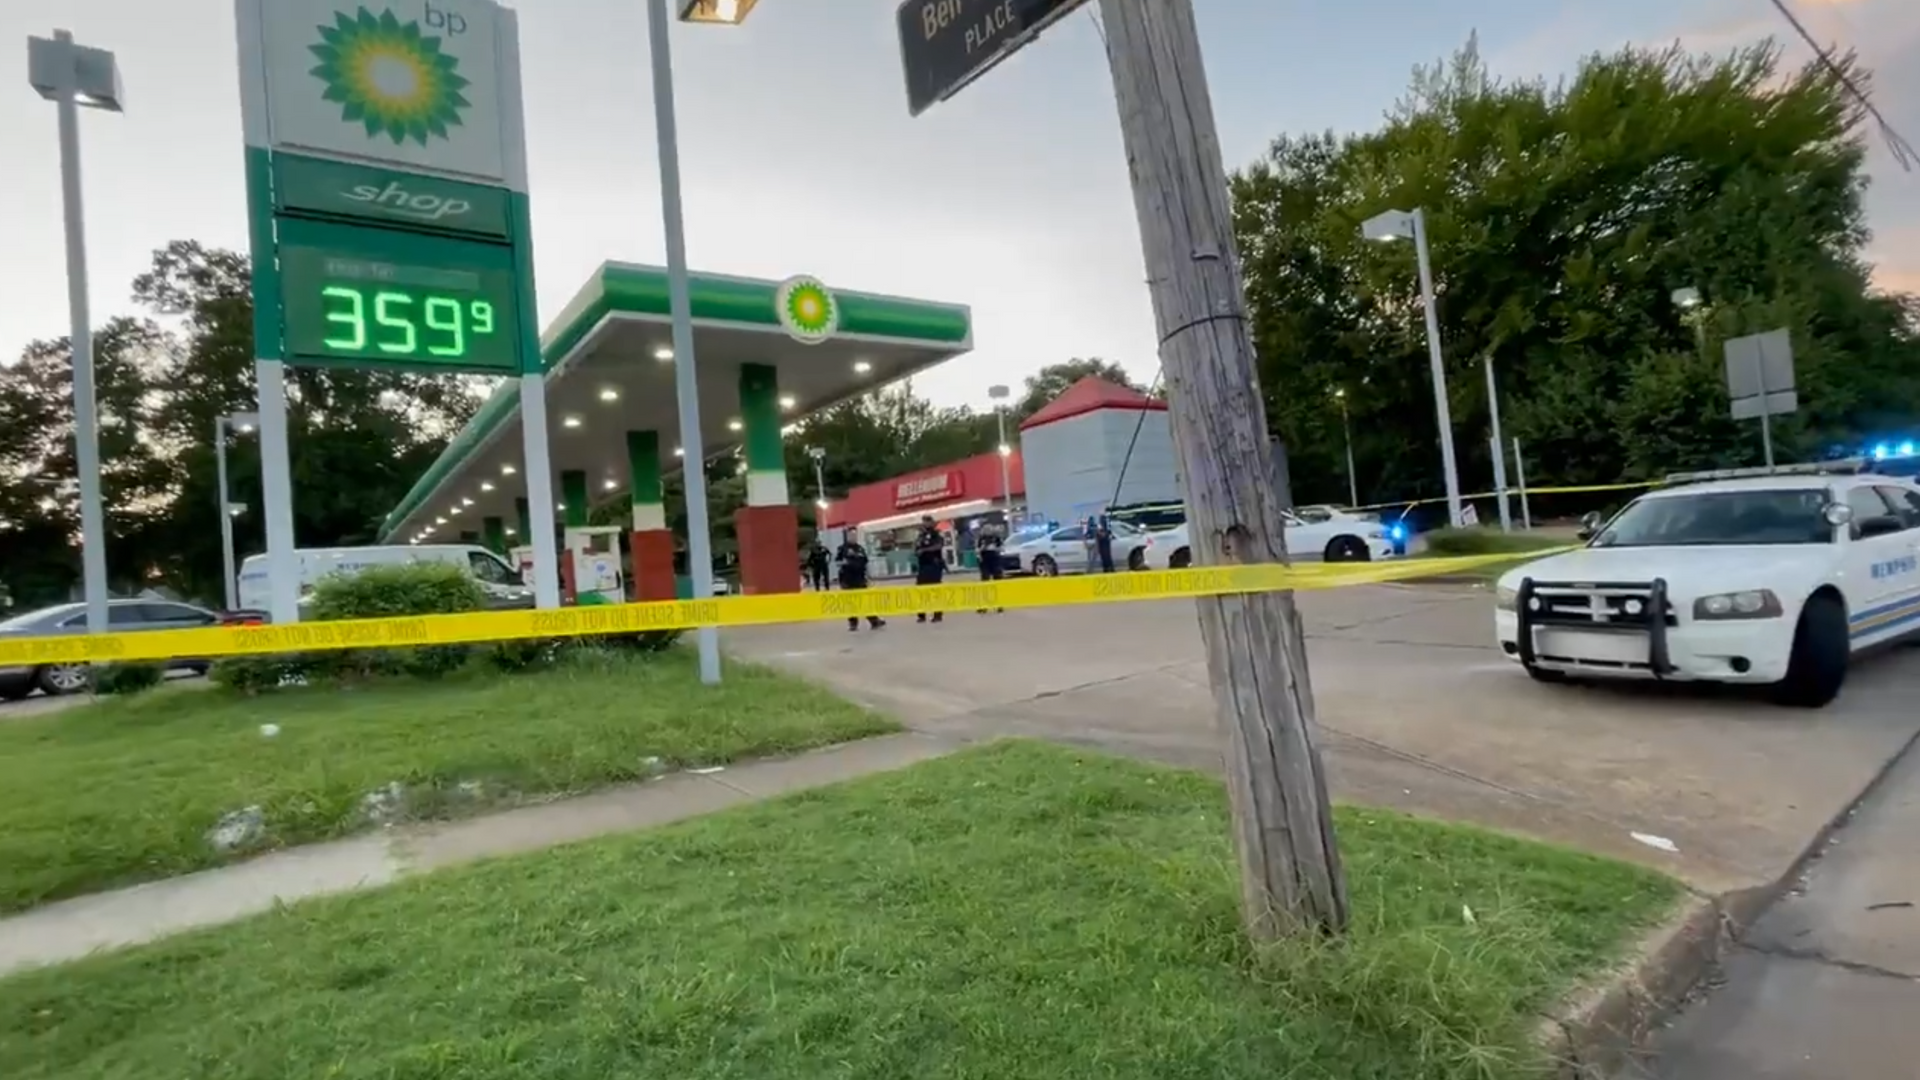 Image captures aftermath of a gunman's shooting spree at a BP gas station in Memphis, Tennessee, on September 7, 2022. The gunman remains at-large. - Sputnik International, 1920, 08.09.2022